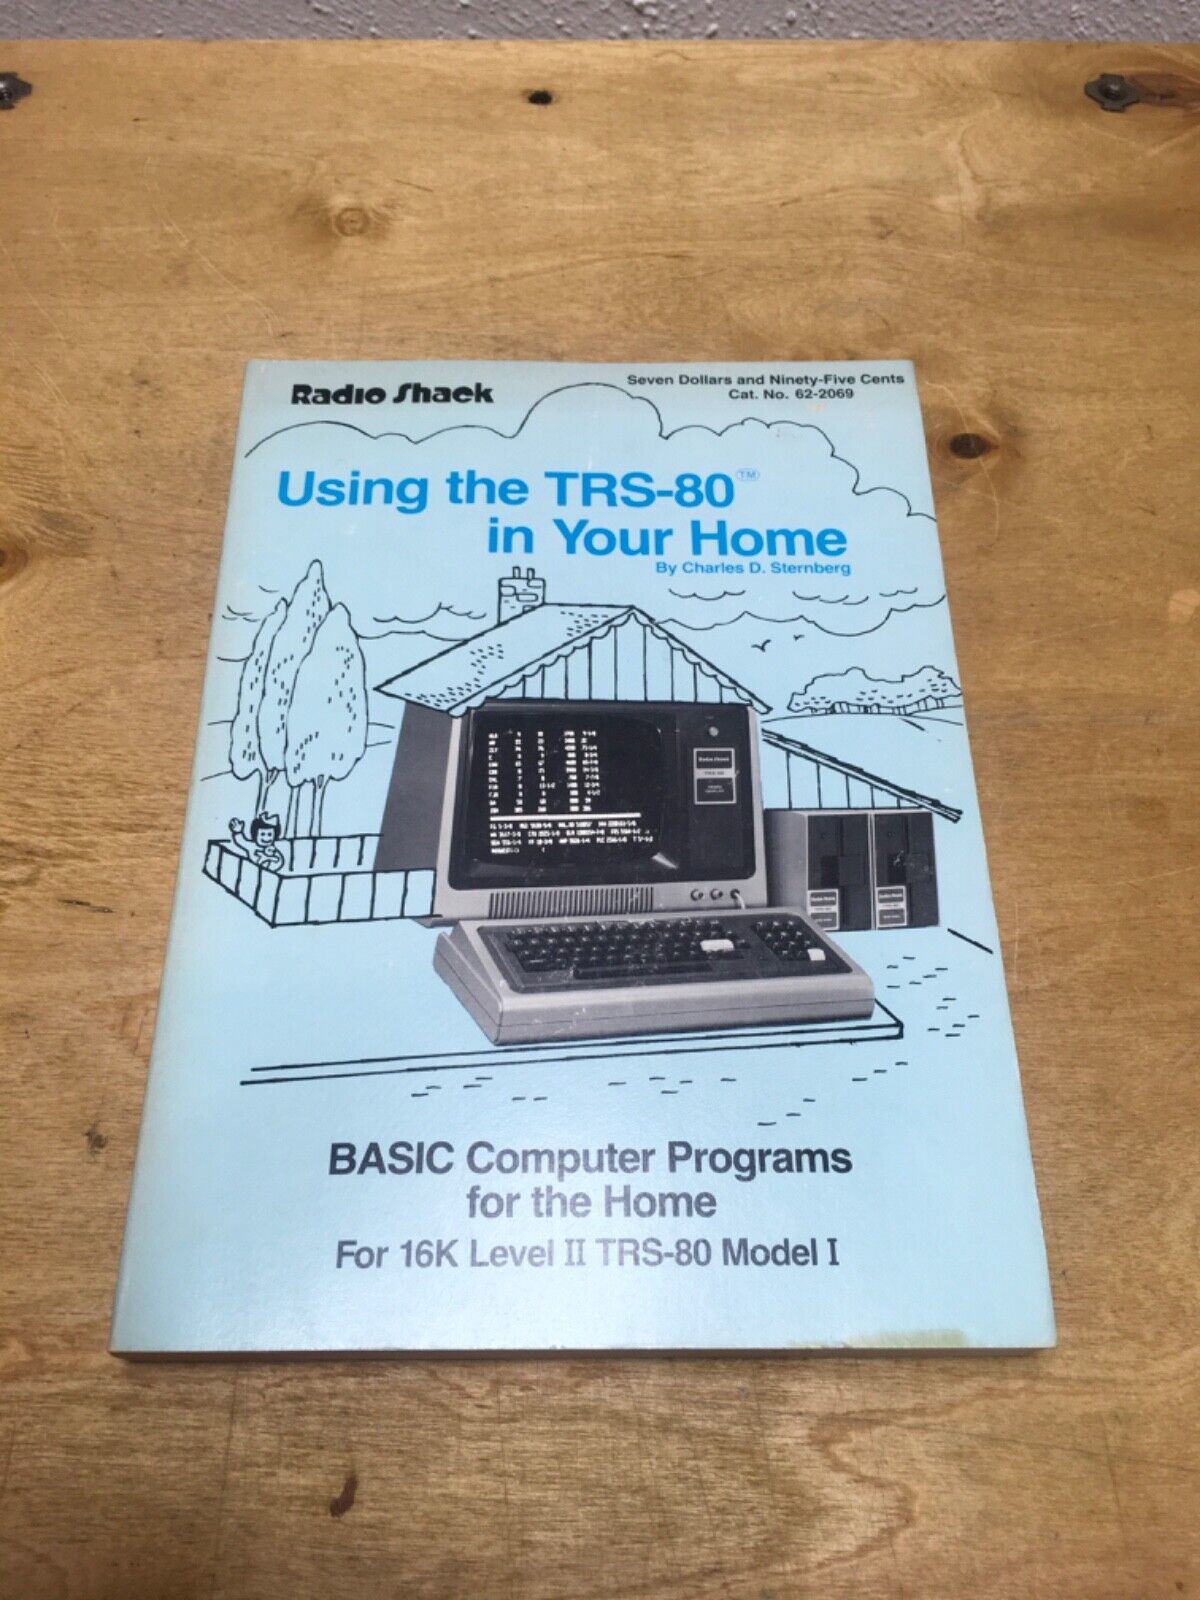 Using the TRS-80 in Your Home basic computer programs for the home book